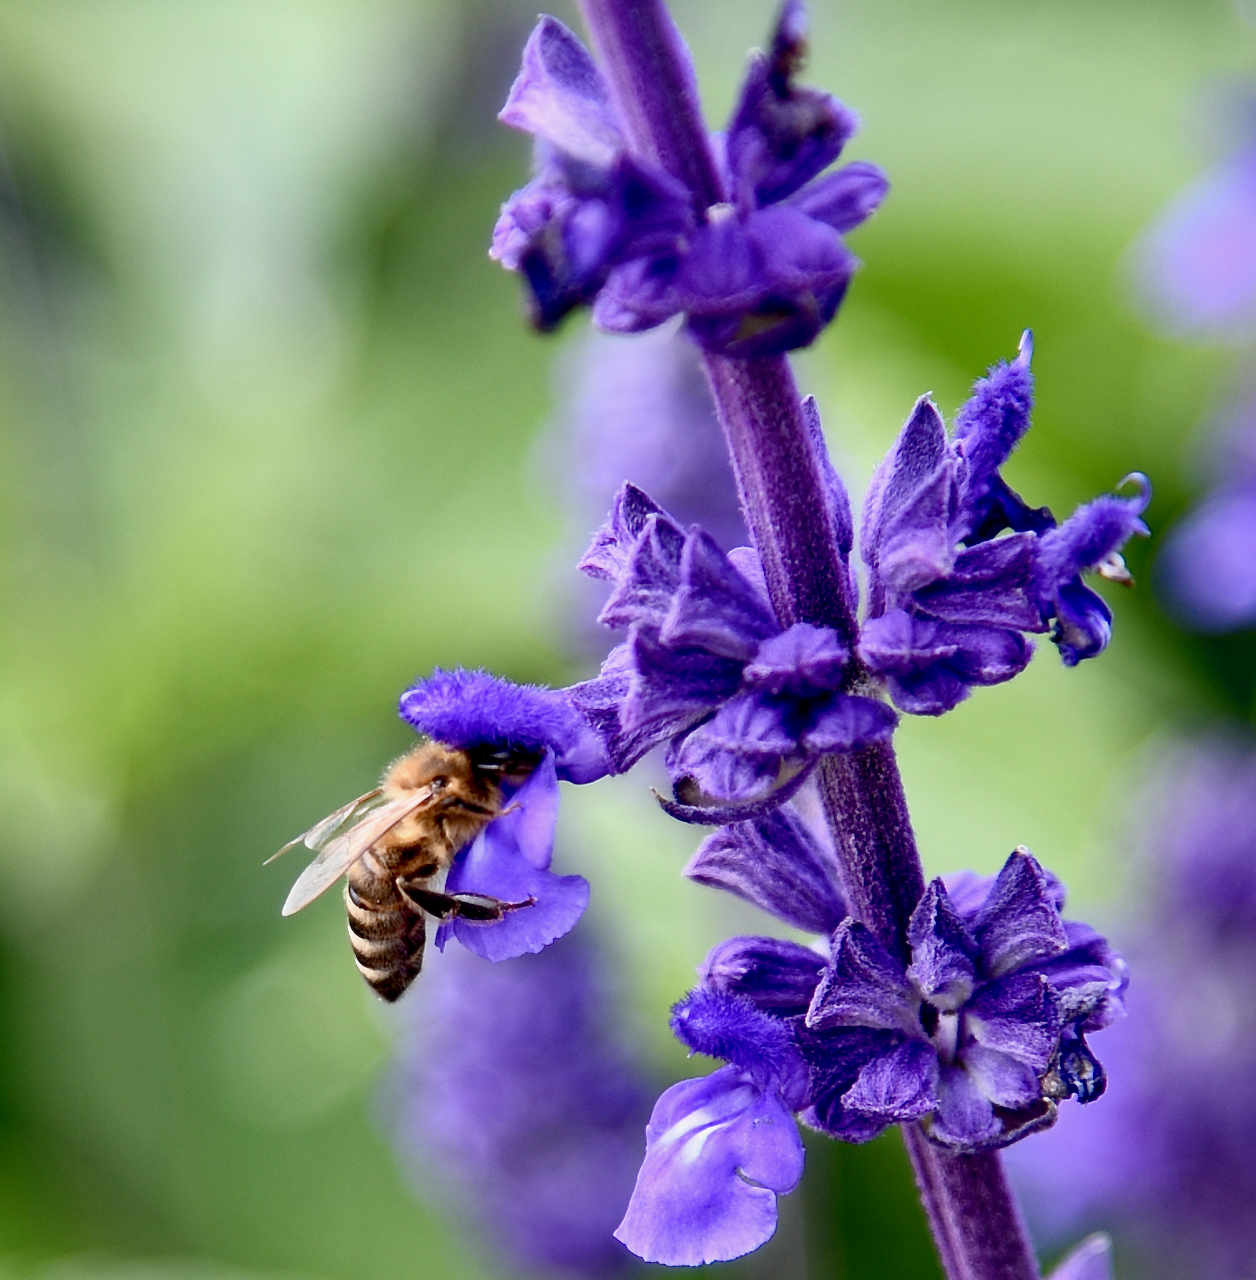 A bee getting nectar from a salvia plant.